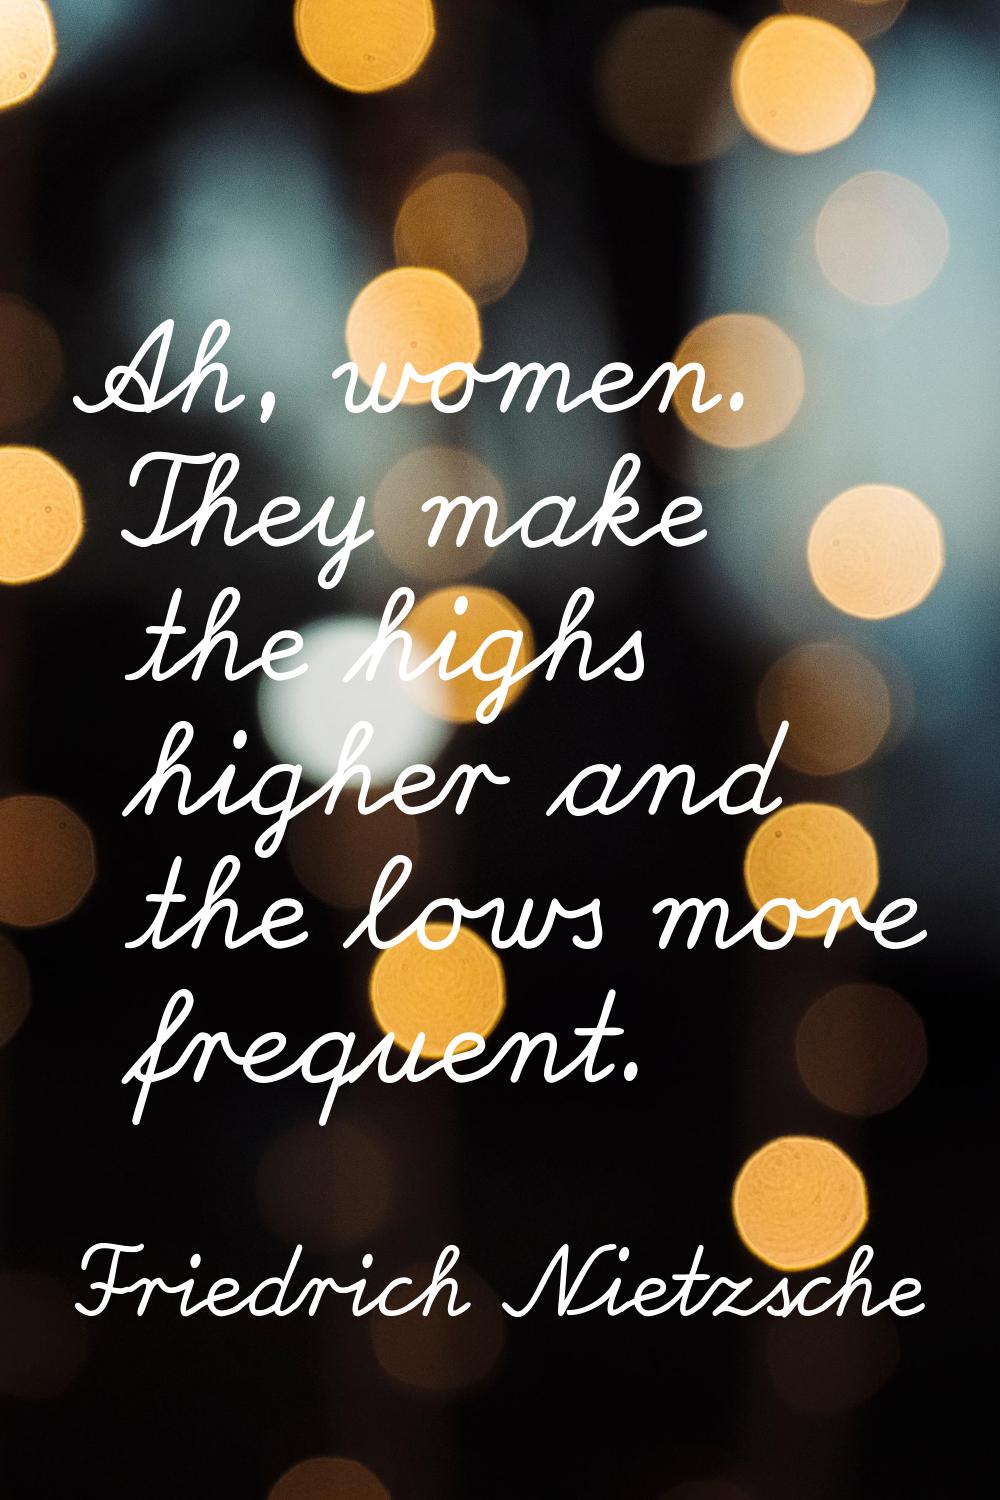 Ah, women. They make the highs higher and the lows more frequent.